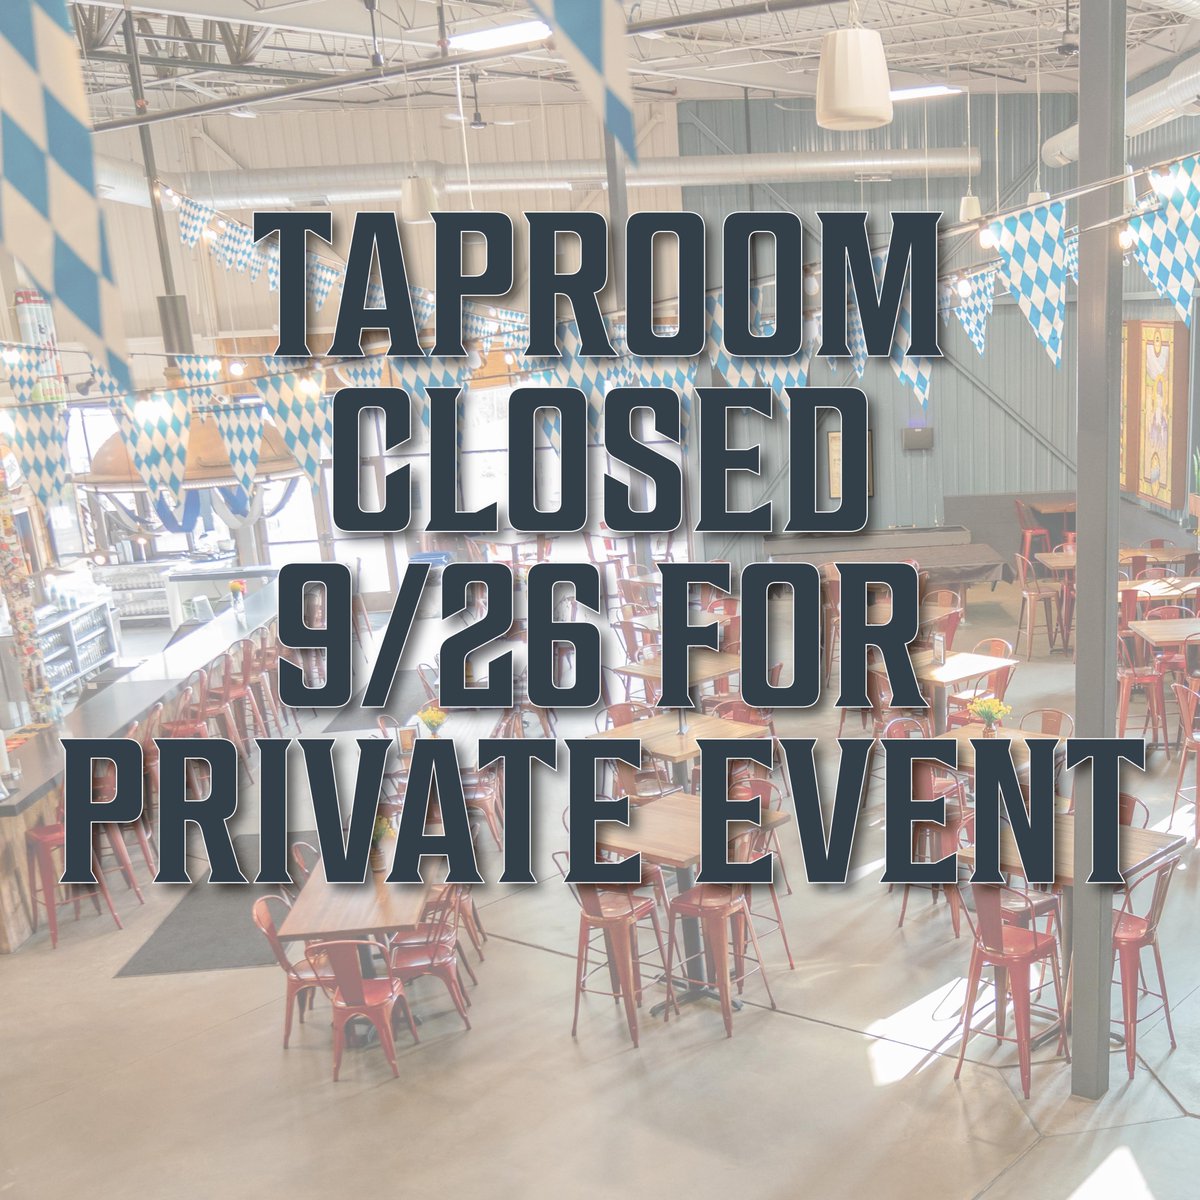 ❗Heads up friends! ❗ We are CLOSED today 9/26 for a Private Event We are so sorry for any inconvenience, we will be back to regular hours tomorrow 🍺